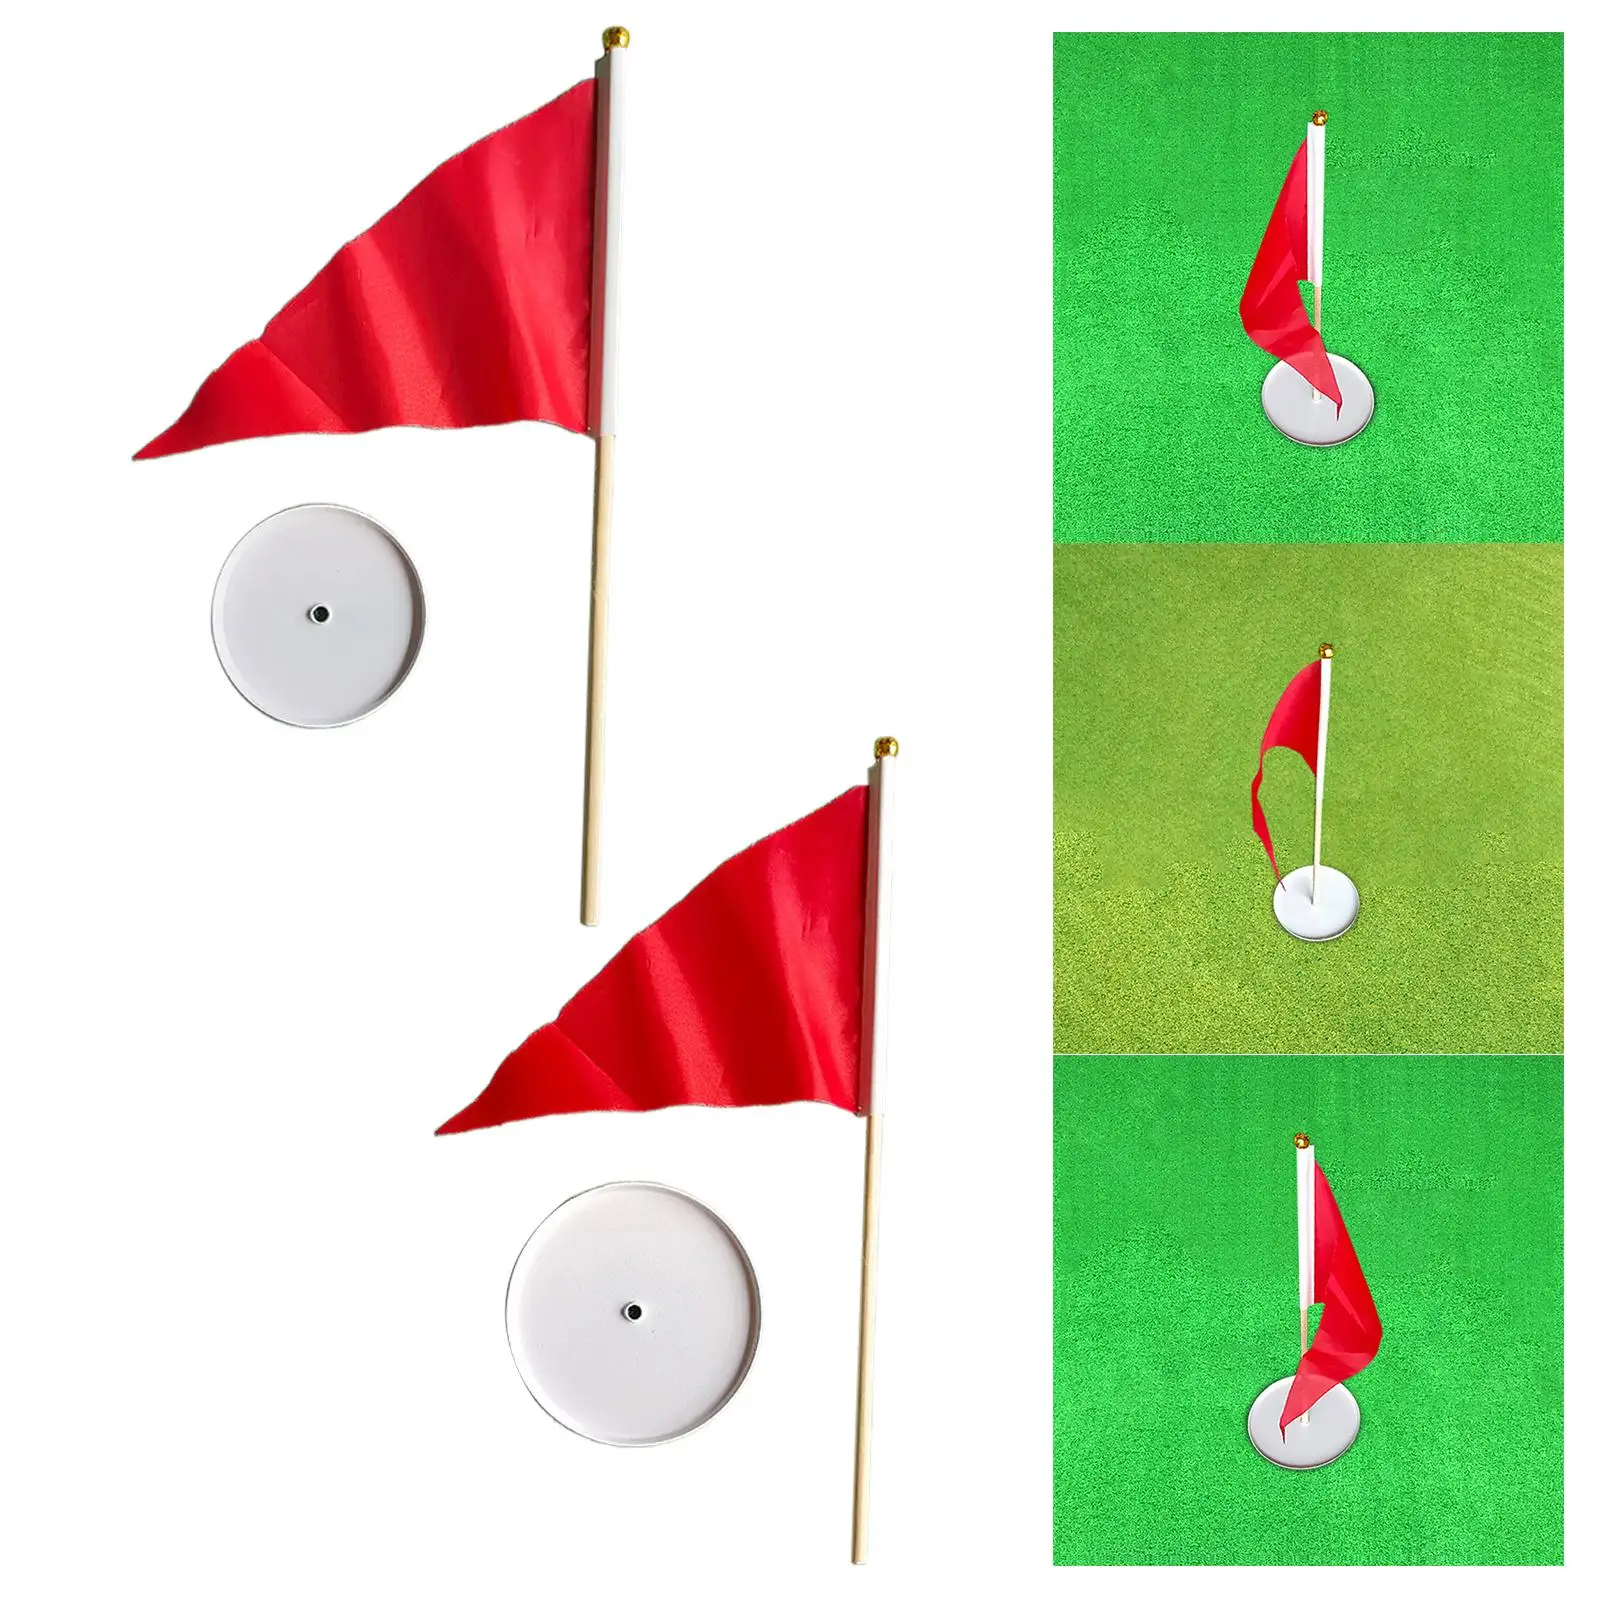 Mini Golf Putting Cup with Flag Flagpole Golf Putter Practice Hole Cup Flagstick Hole Cup Set for Yard Indoor Outdoor Use